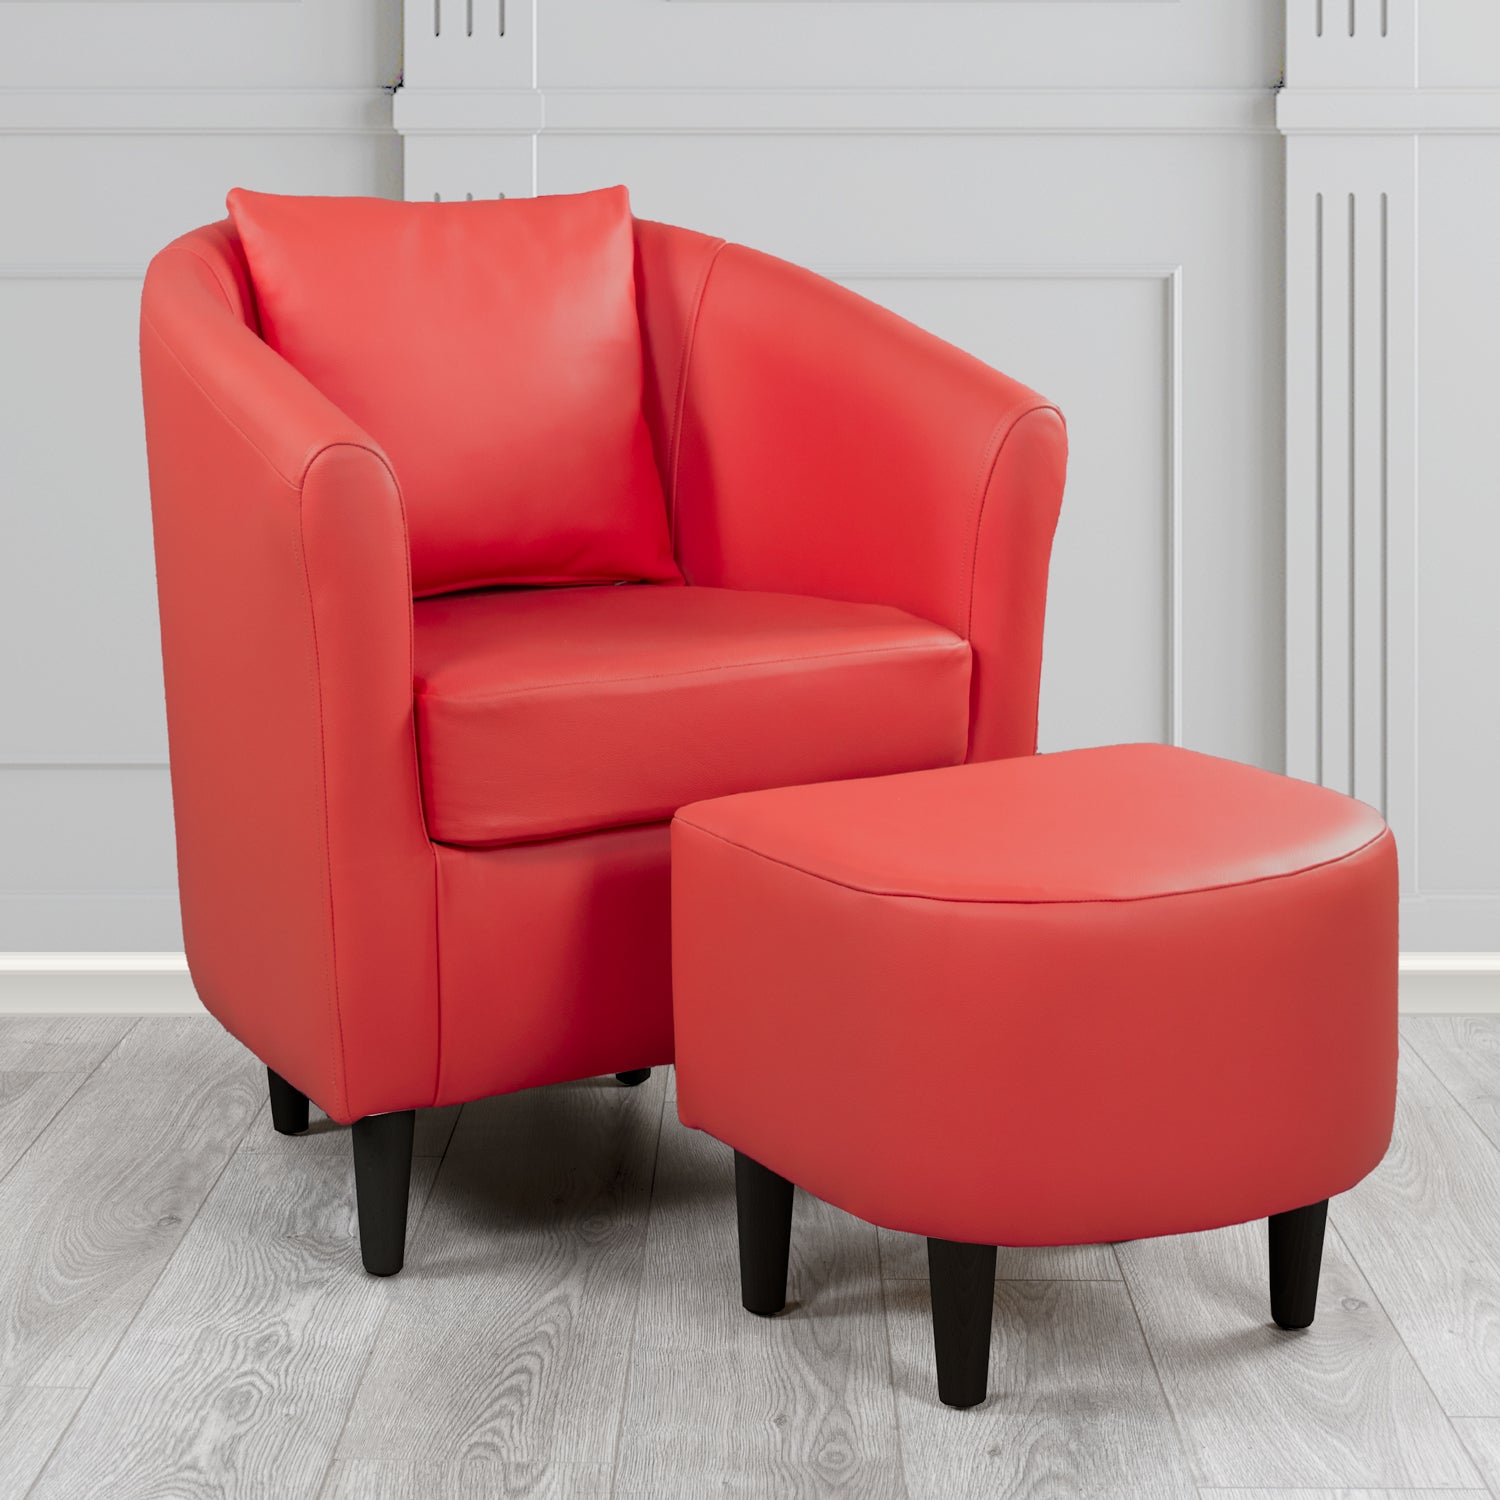 St Tropez Shelly Crimson Crib 5 Genuine Leather Tub Chair & Footstool Set With Scatter Cushion (6619473805354)